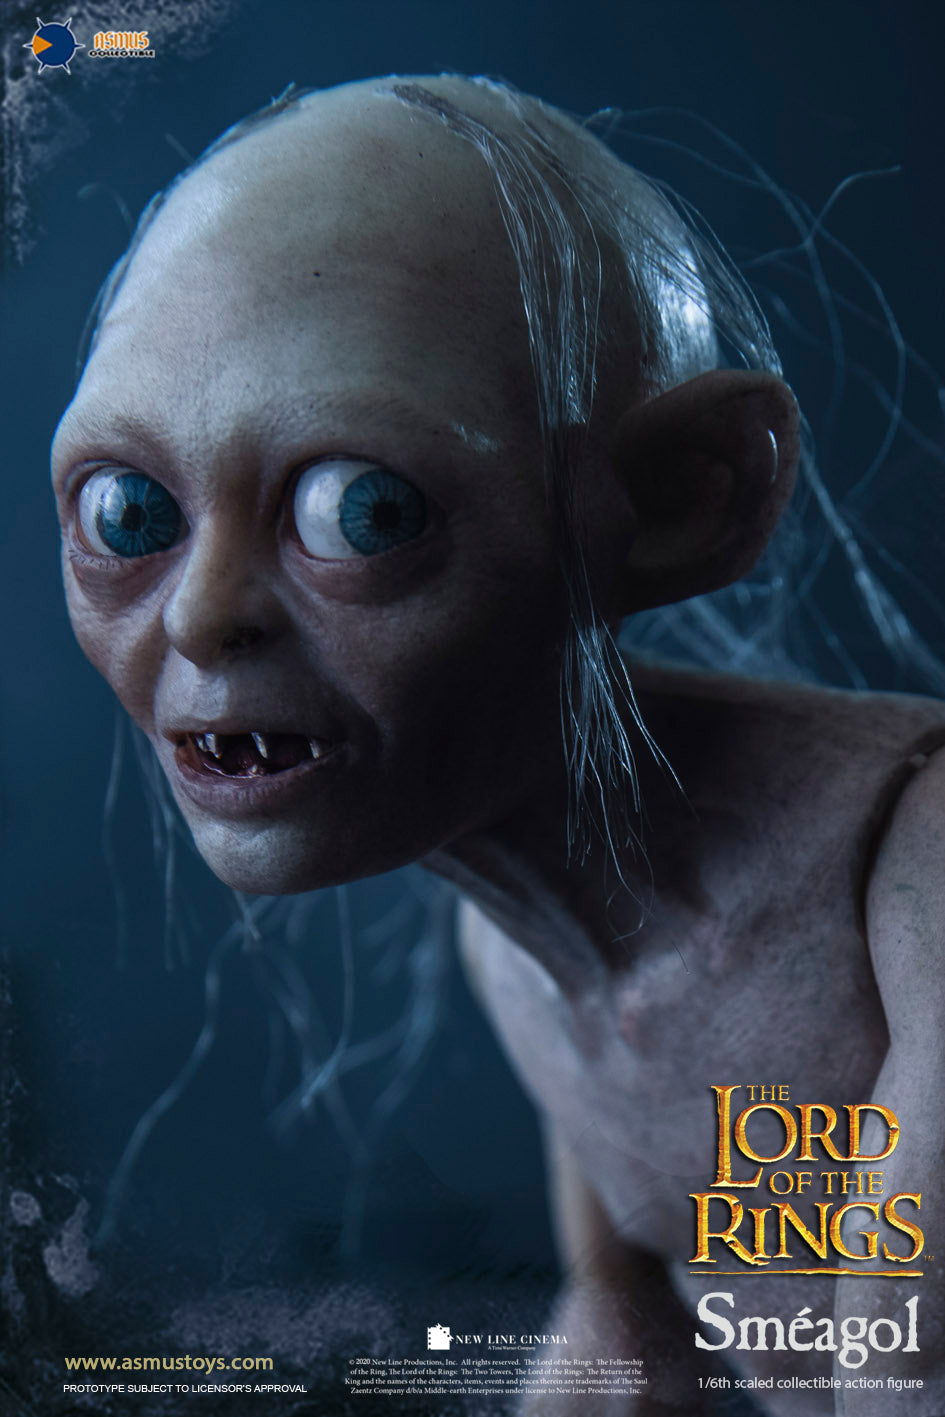 LOTR The Two Towers - Gollum and Sméagol 